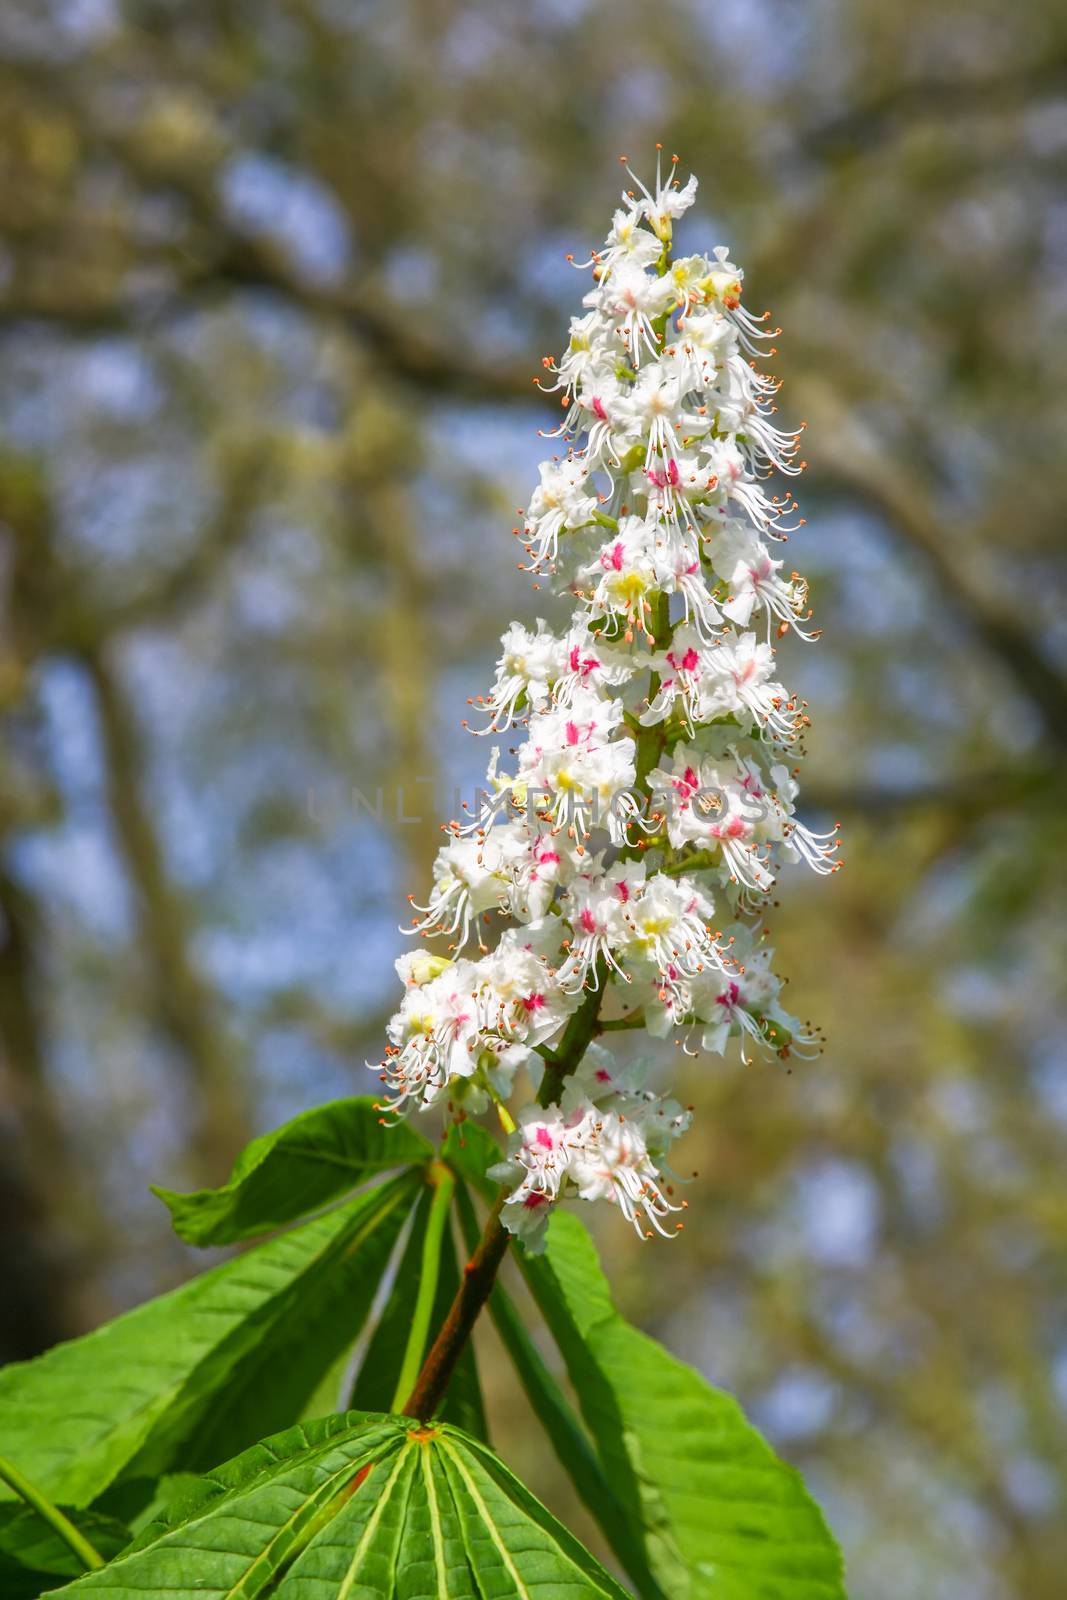 An image of a beautiful chestnuts bloom